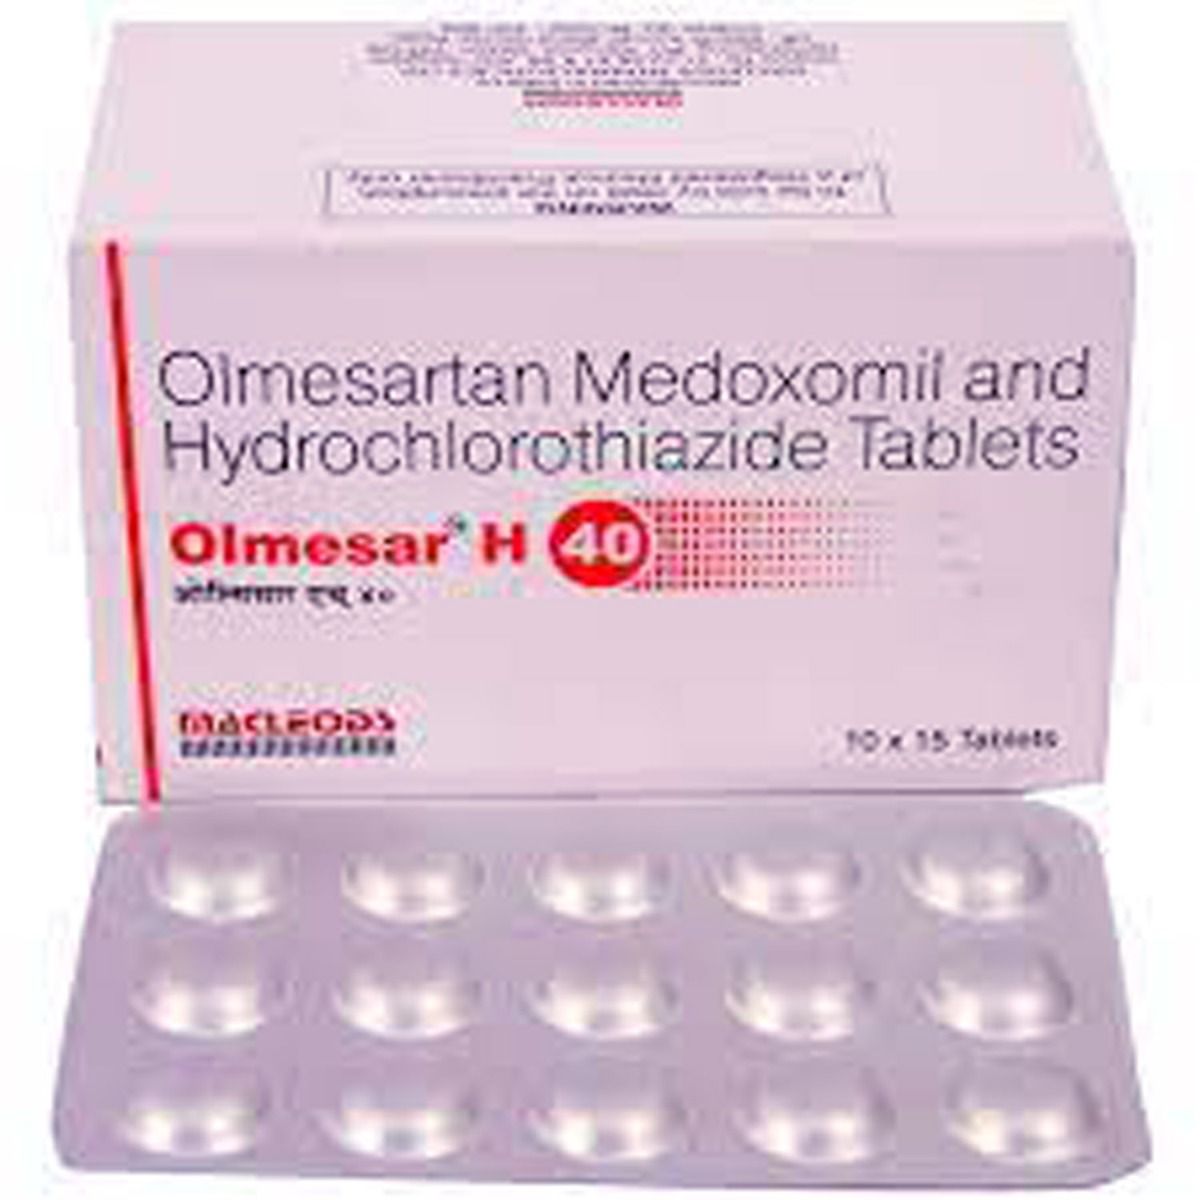 Olmesar H 40 Tablet 15's Price, Uses, Side Effects, Composition ...